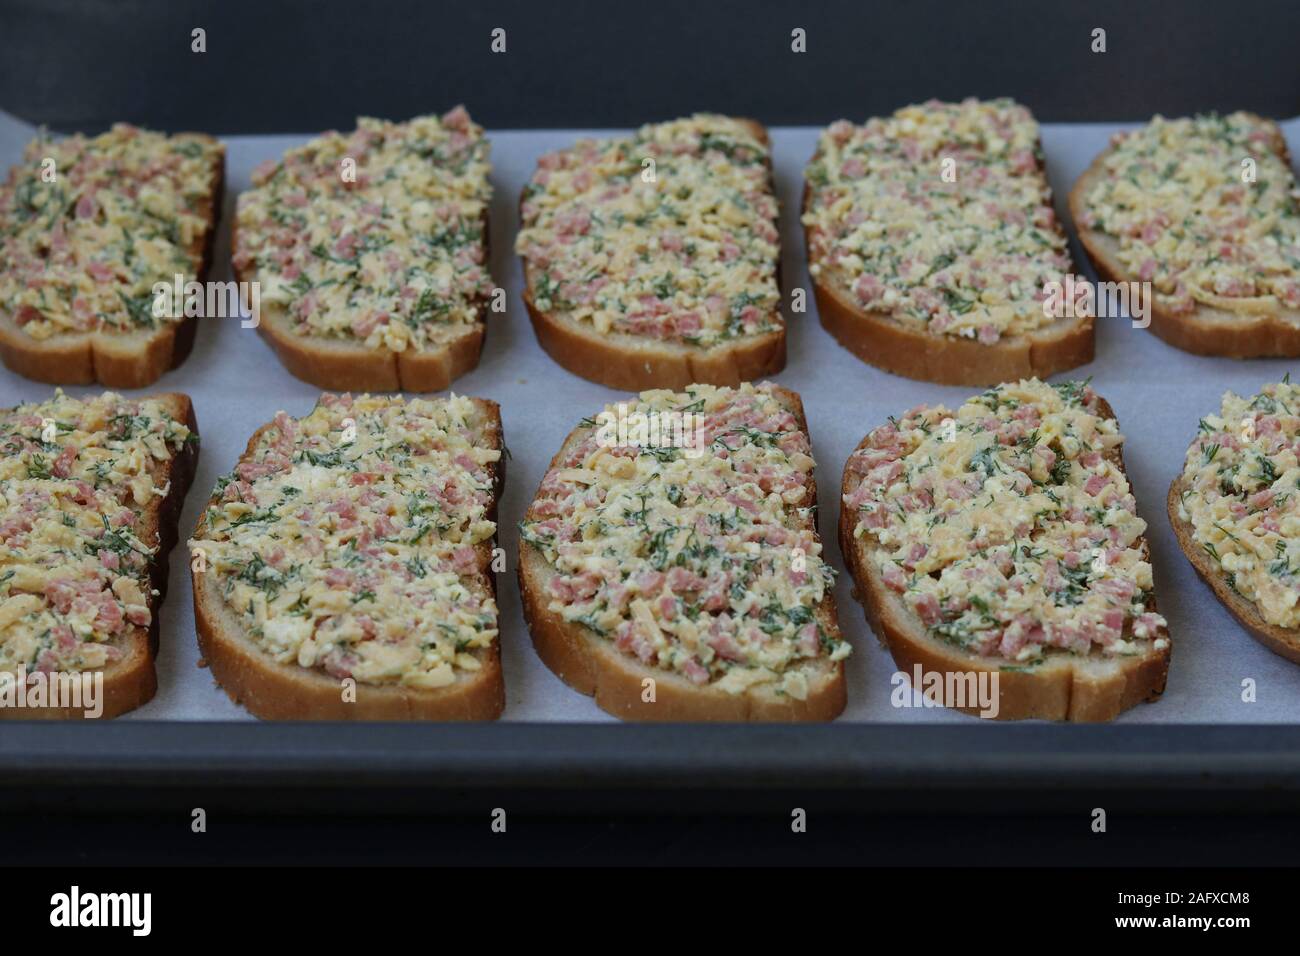 Homemade sandwiches with cheese and sausage before baking on parchment on a baking sheet, the cooking process, Horizontal orientation Stock Photo